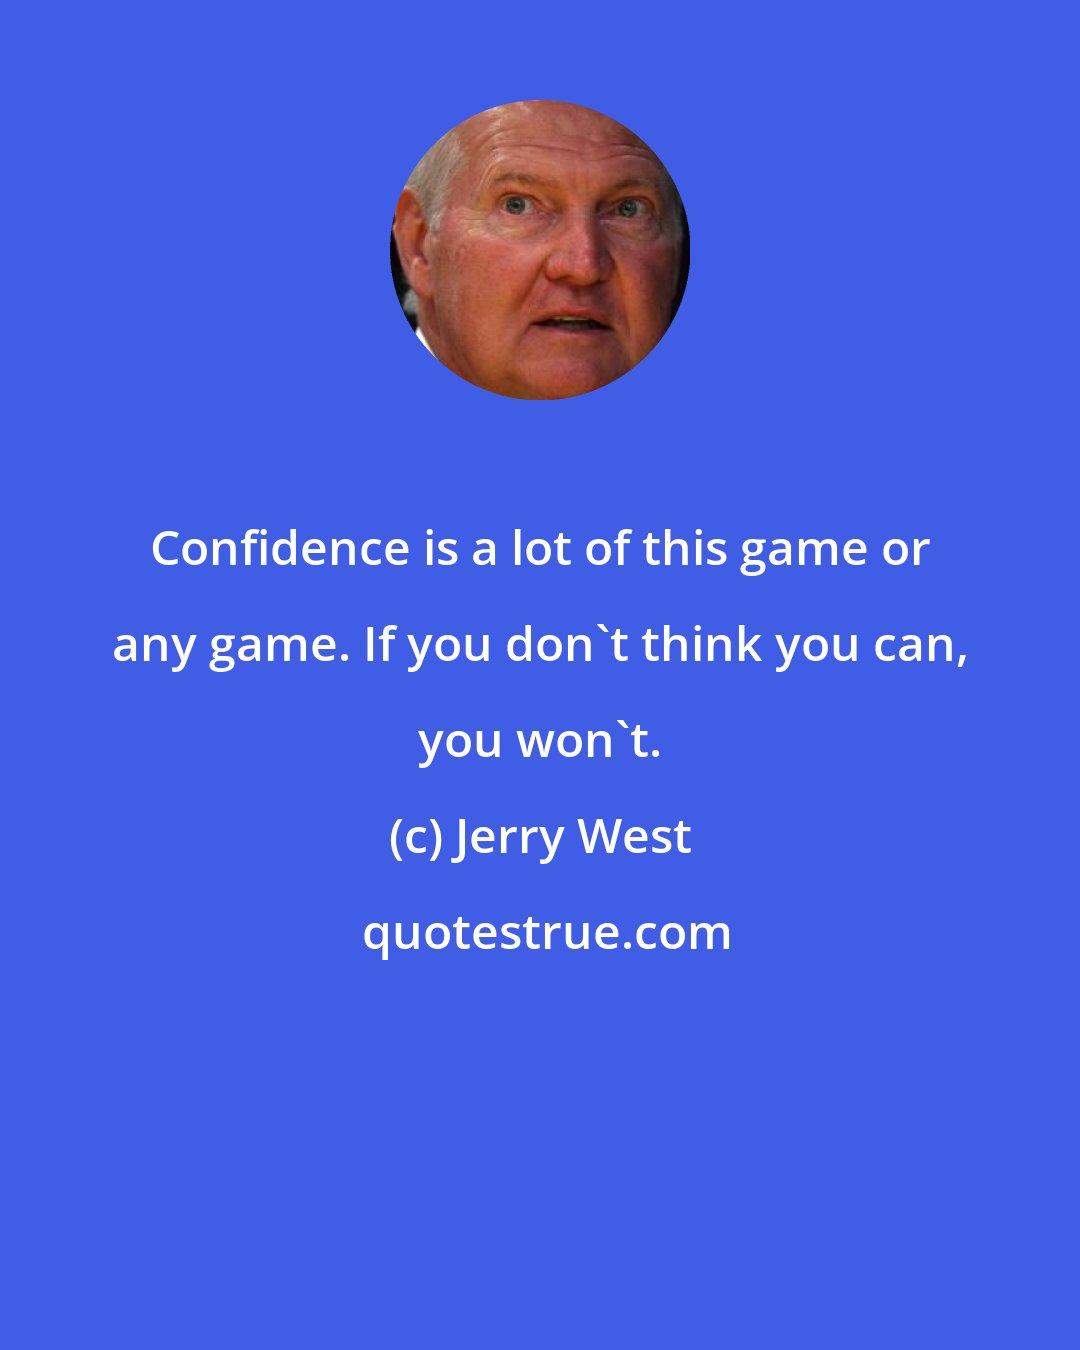 Jerry West: Confidence is a lot of this game or any game. If you don't think you can, you won't.